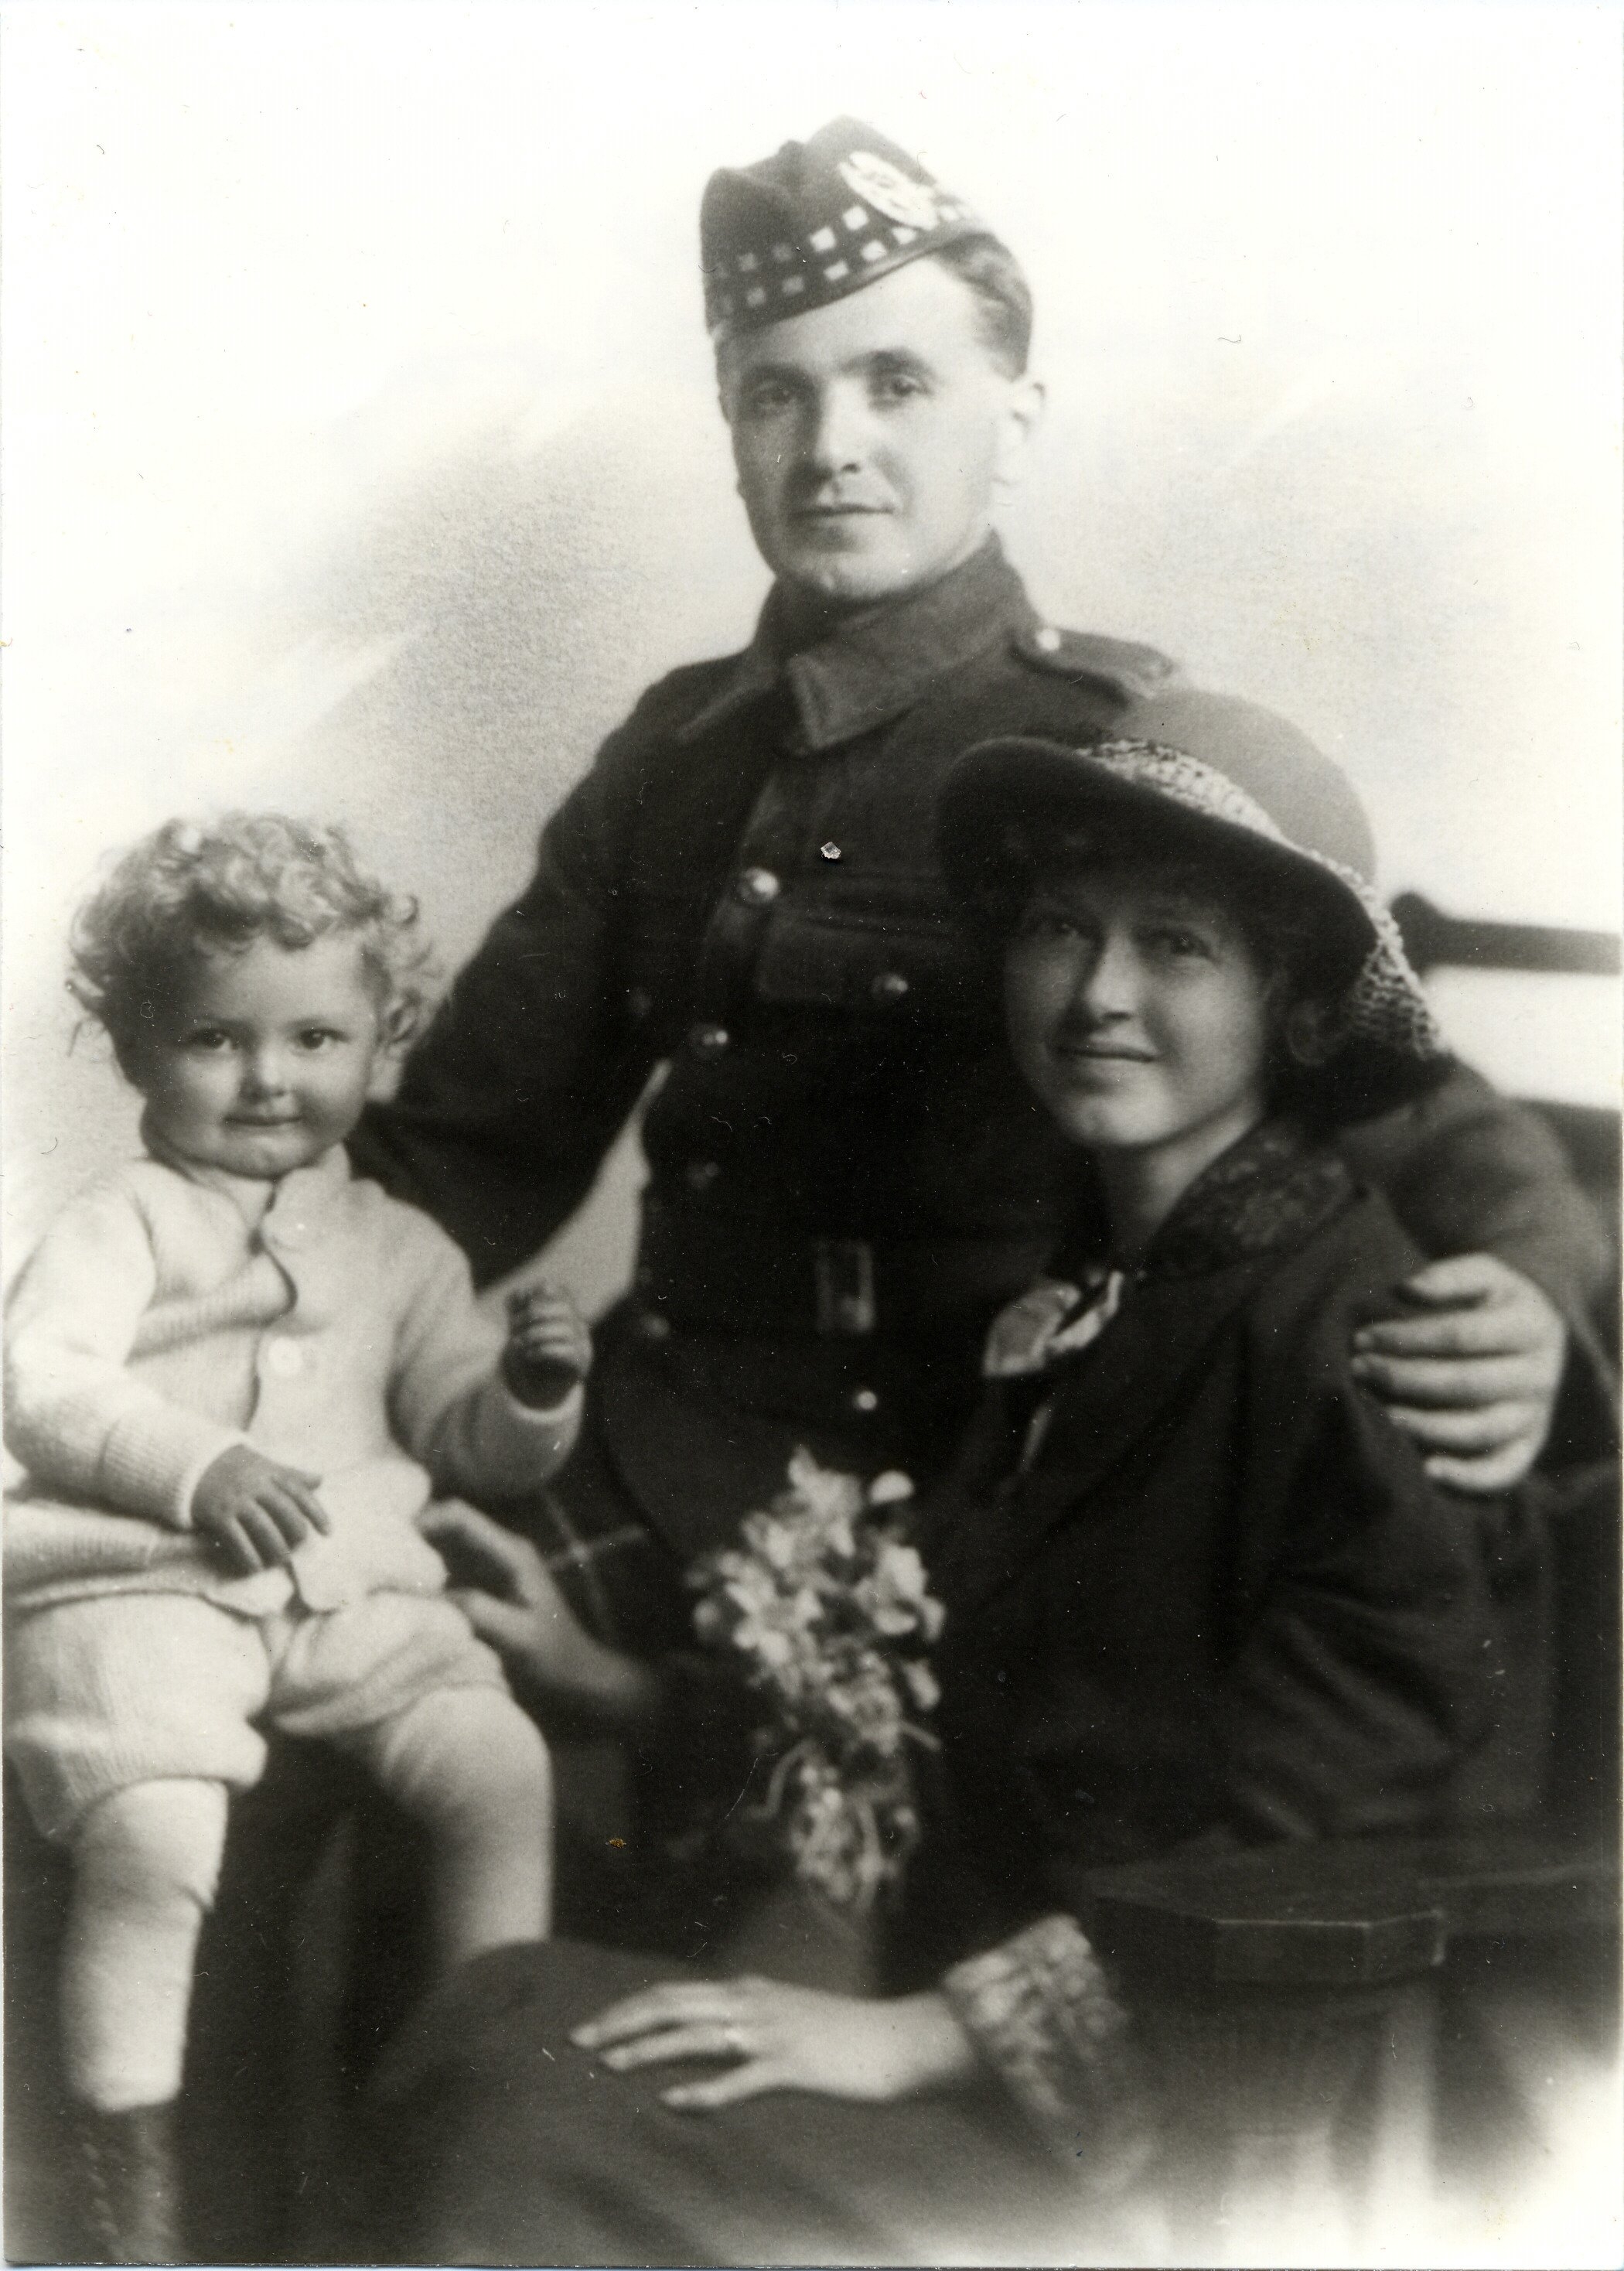 Frederick Stanley Hatten & family, Vancouver, 1915